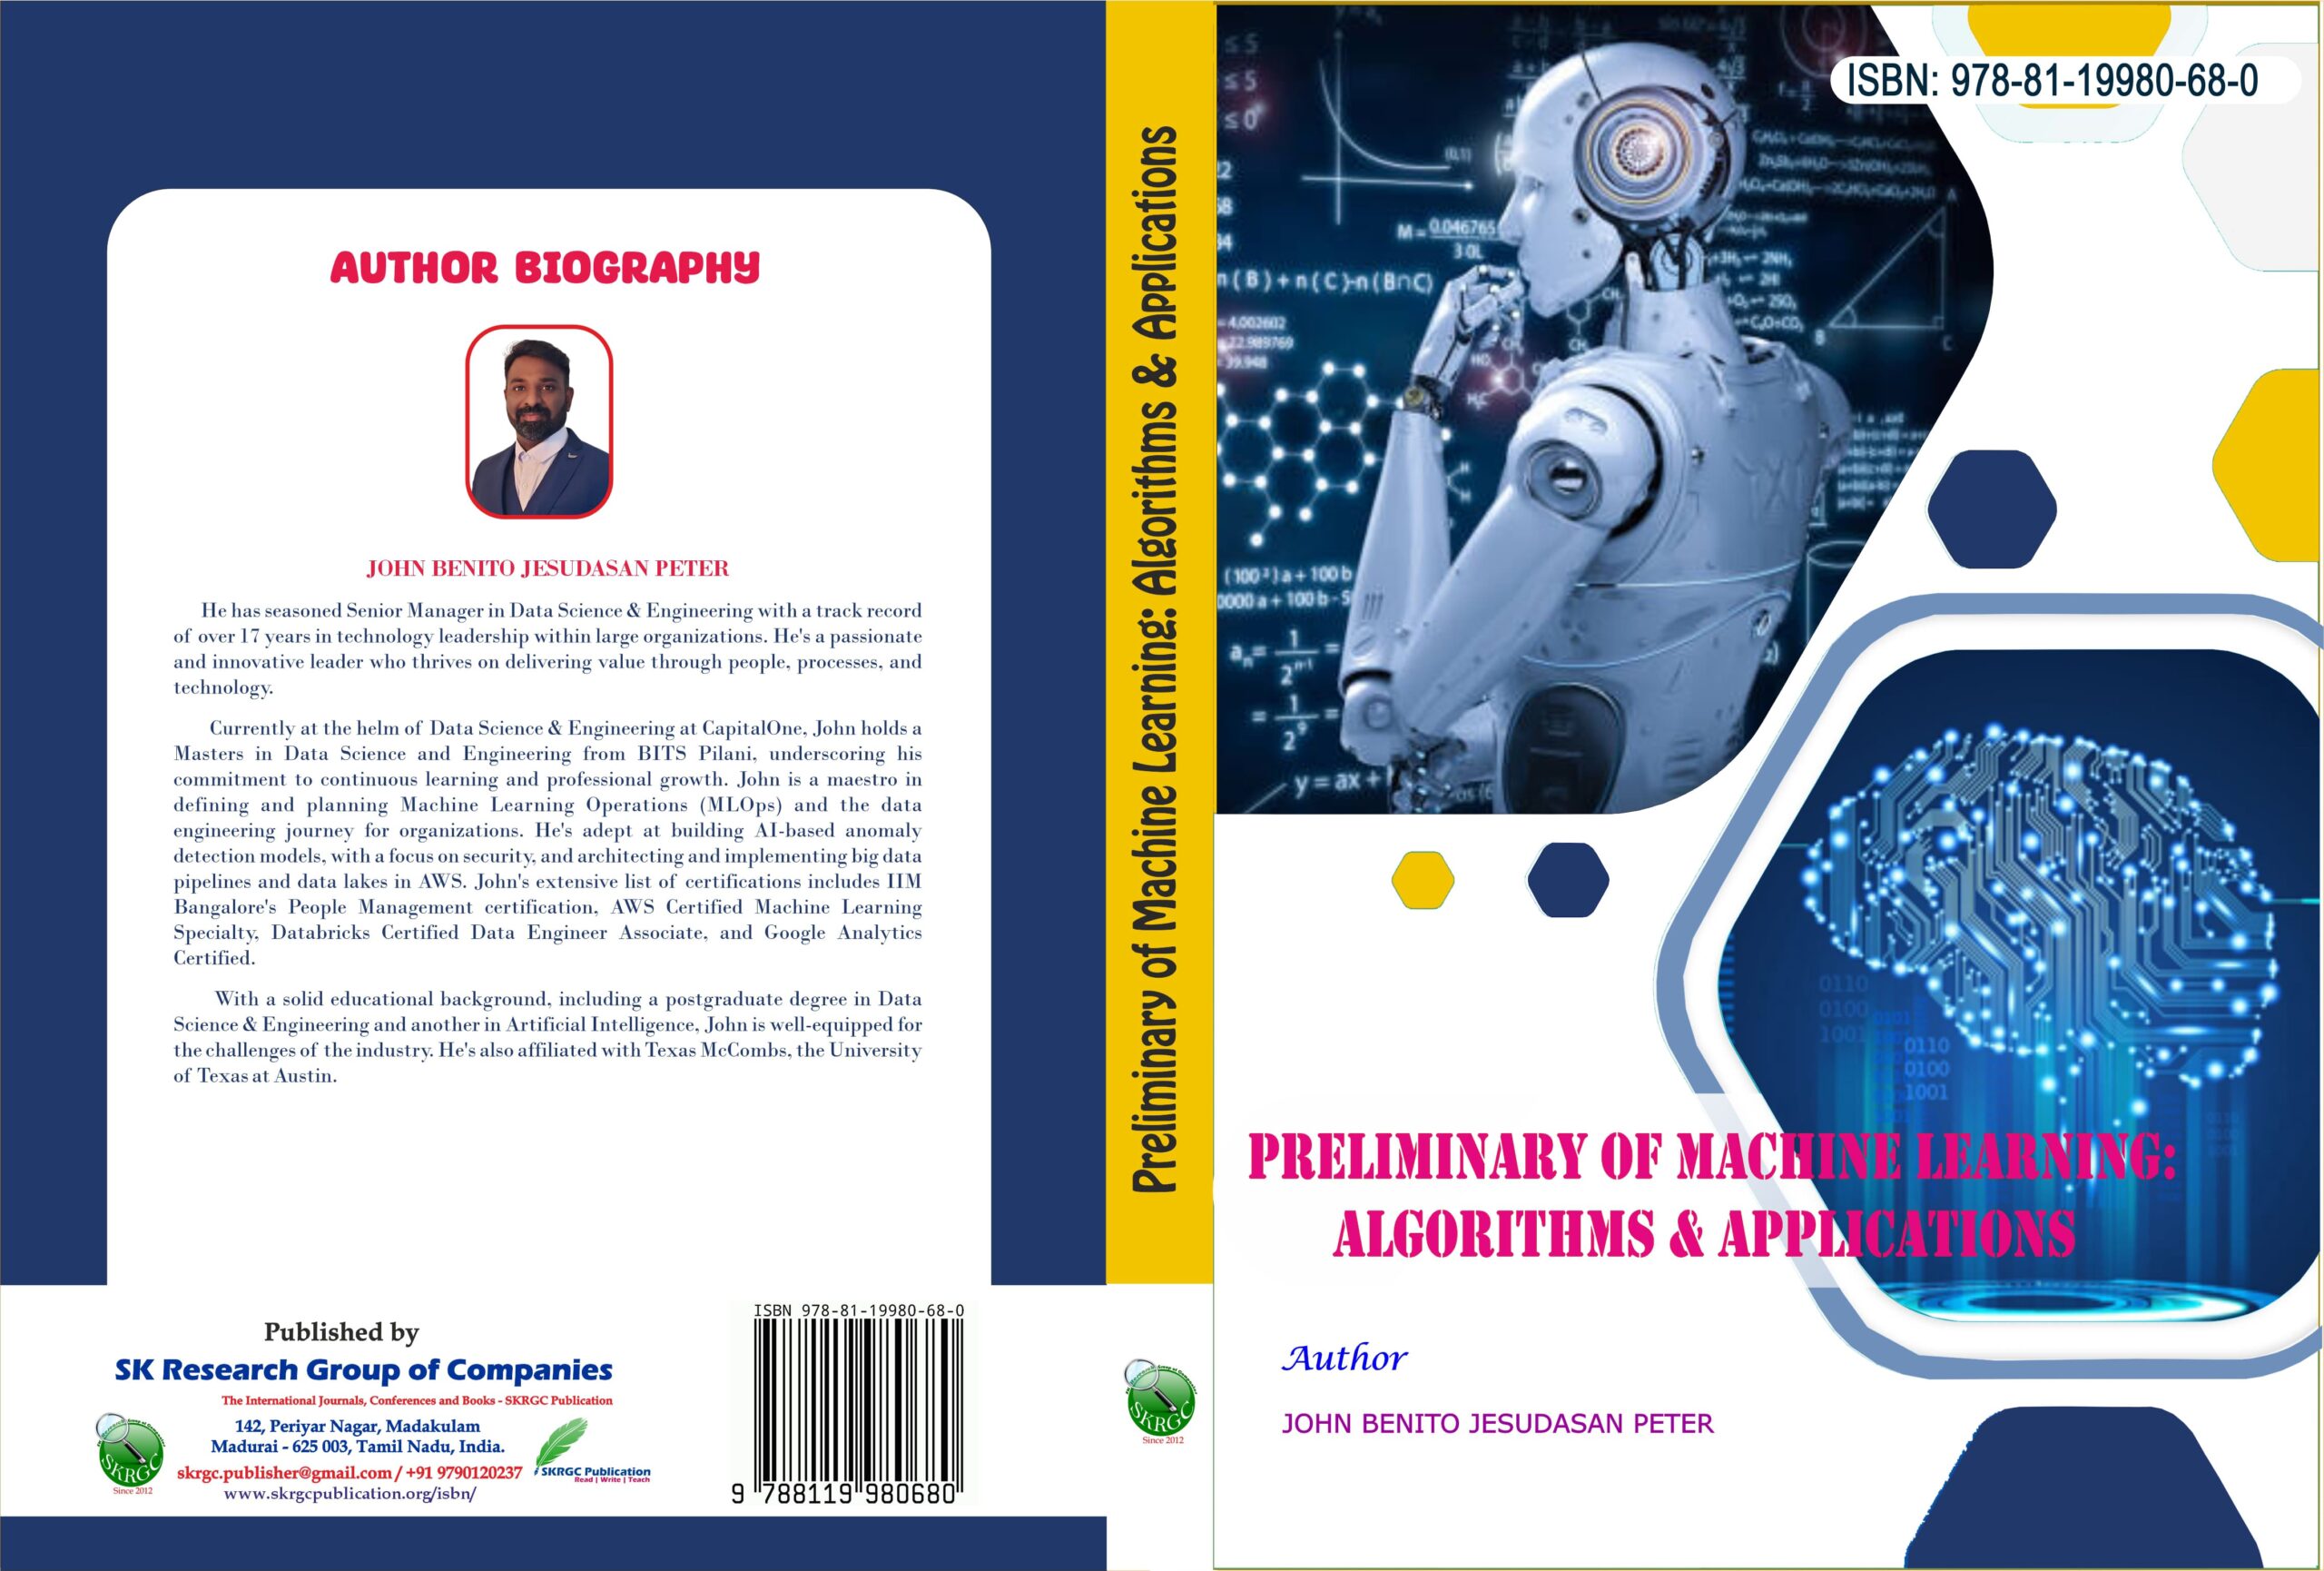 Preliminary of Machine Learning: Algorithms & Applications